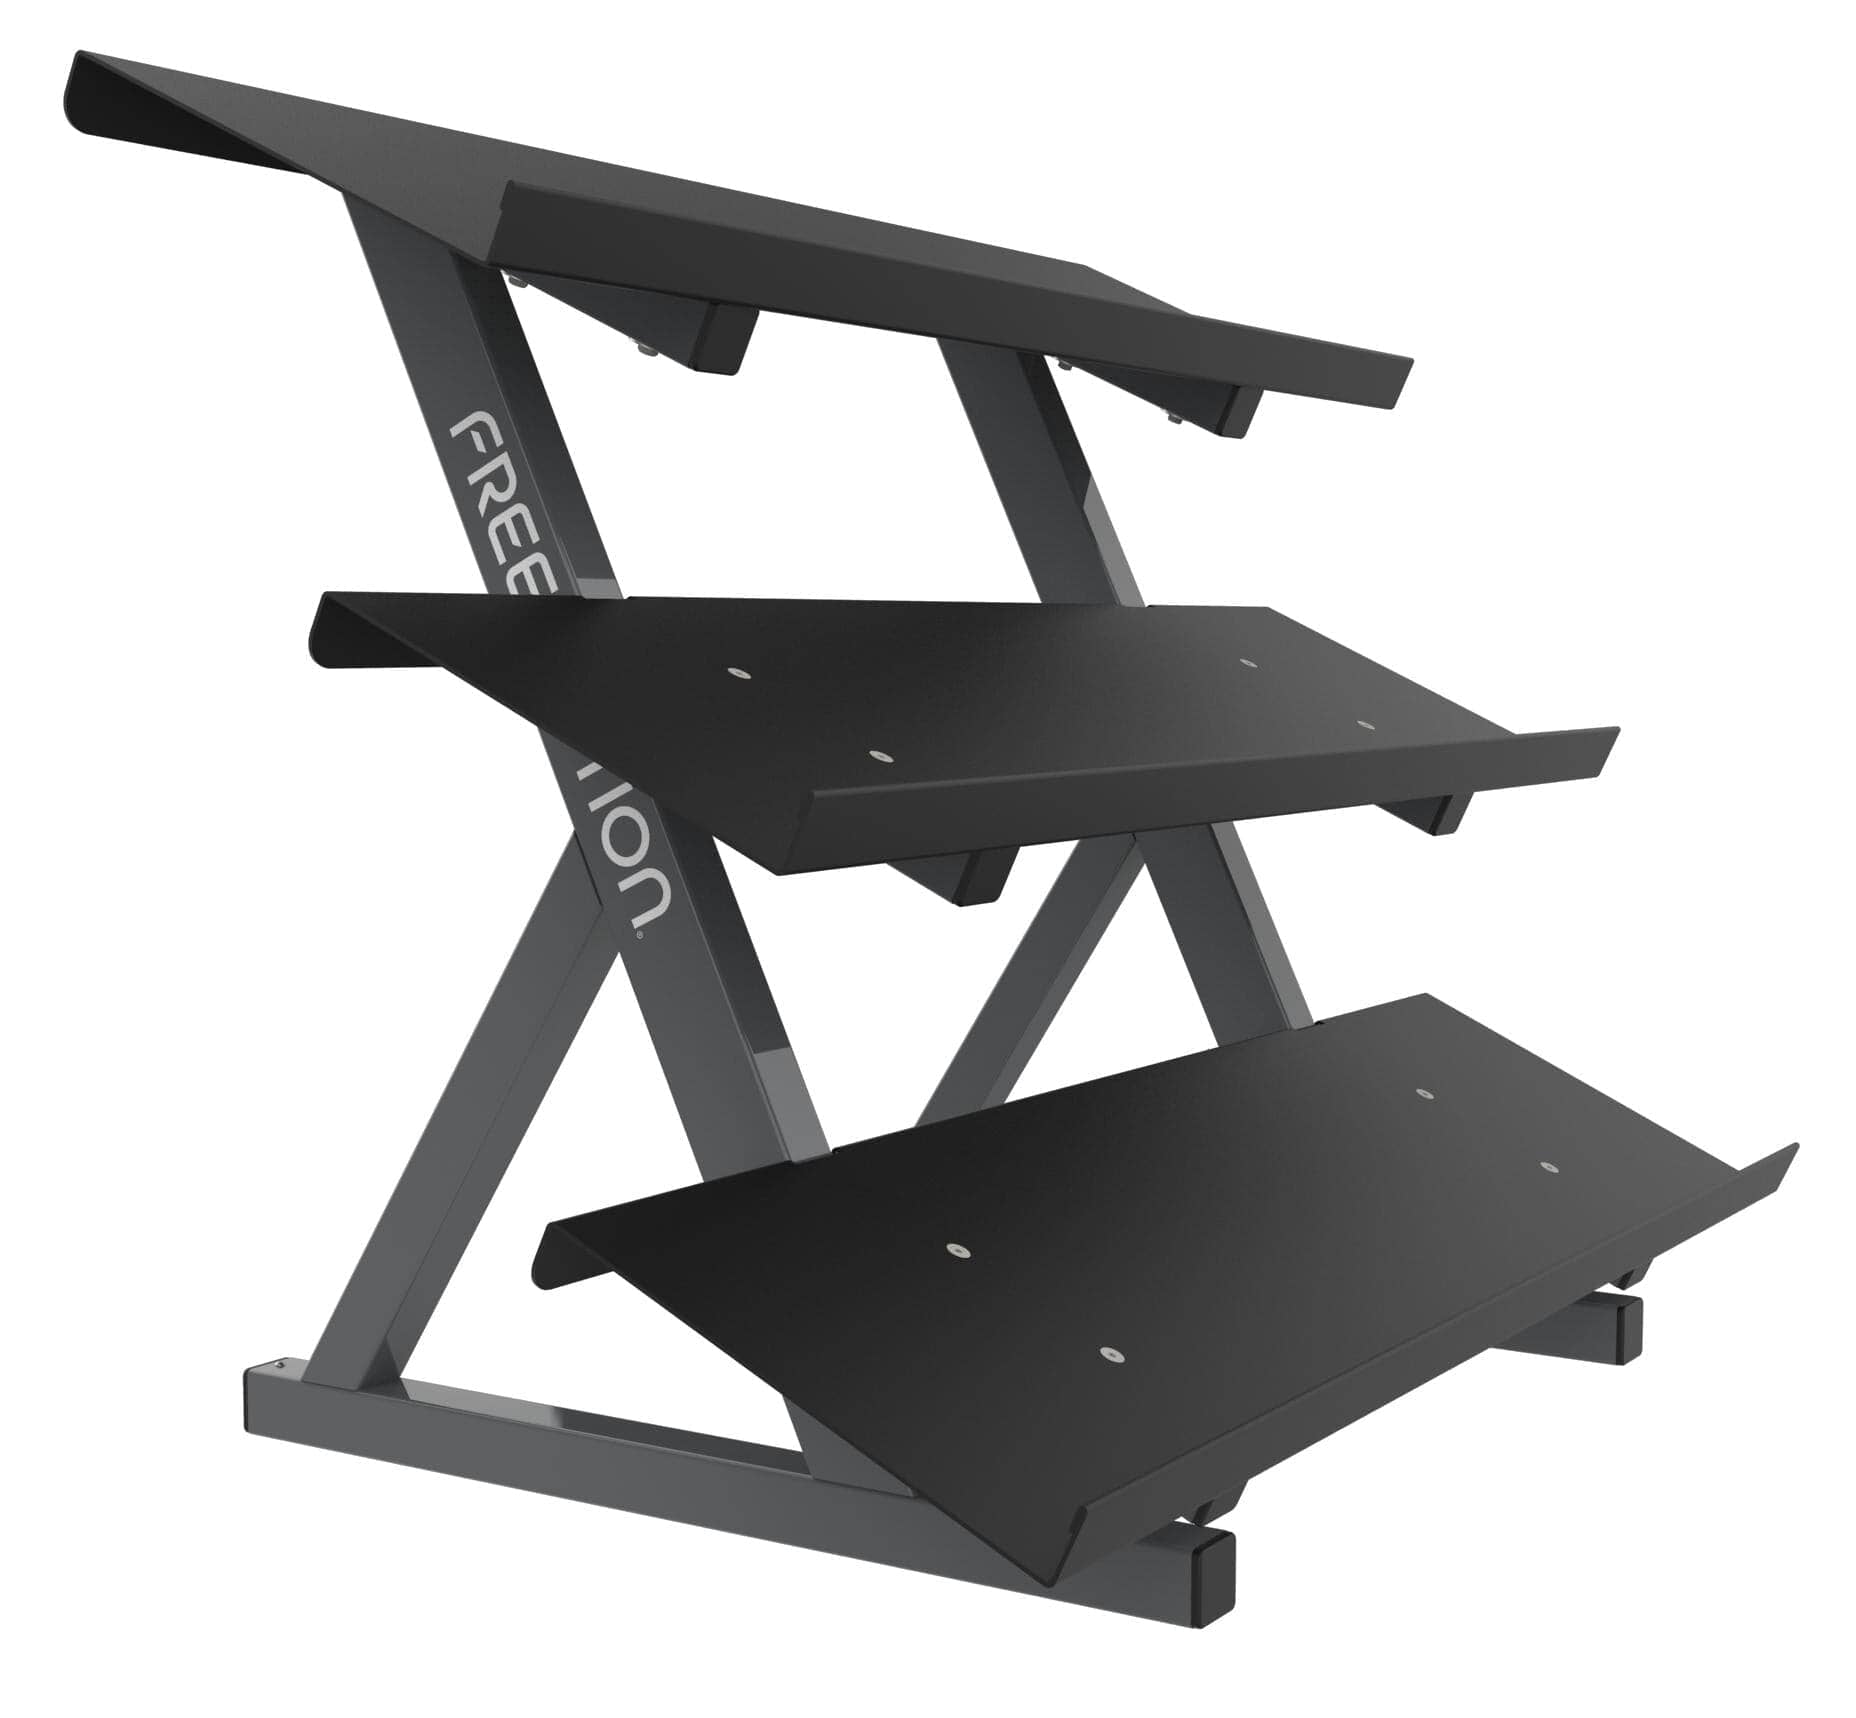 Freemotion Hex Dumbbell Rack - Short (FMDY109083) Weight Storage Freemotion 